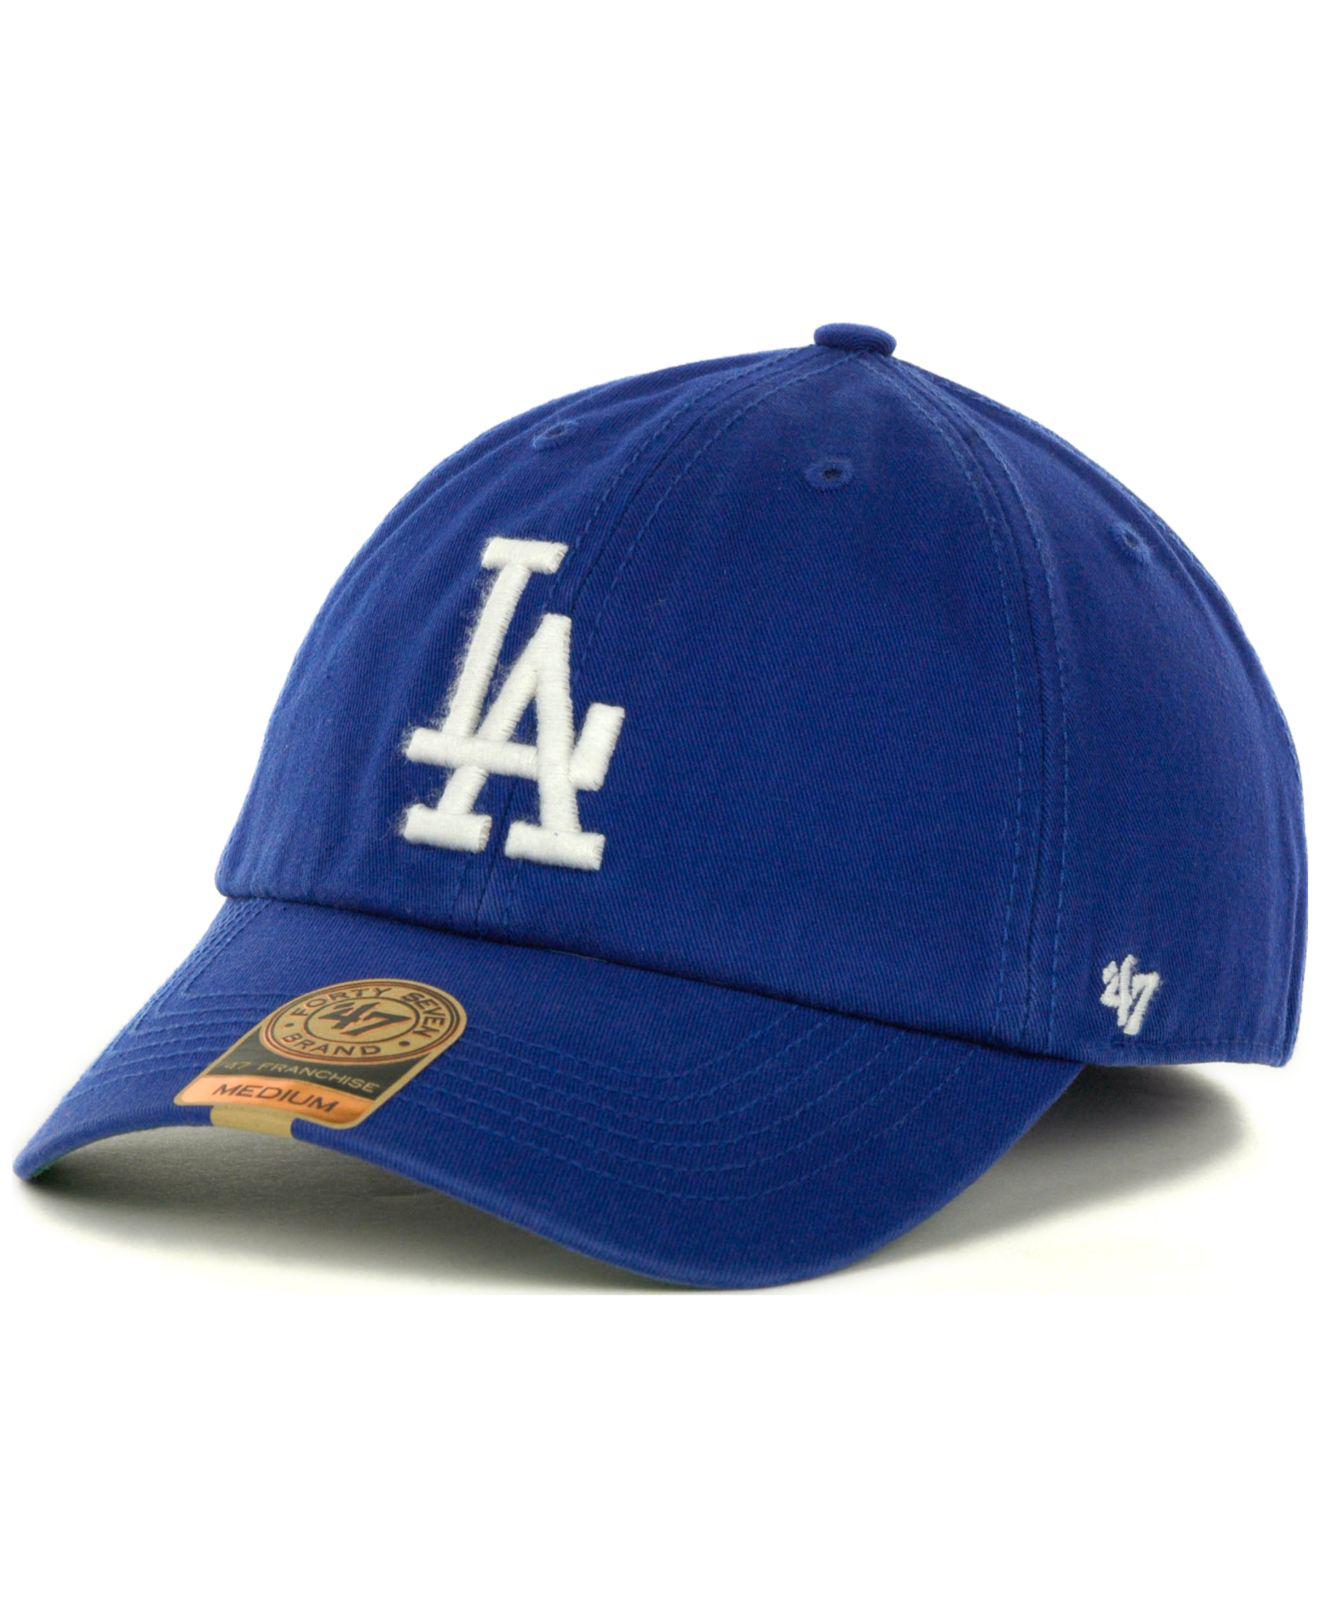 Lyst - 47 Brand Los Angeles Dodgers Franchise Cap in Green for Men